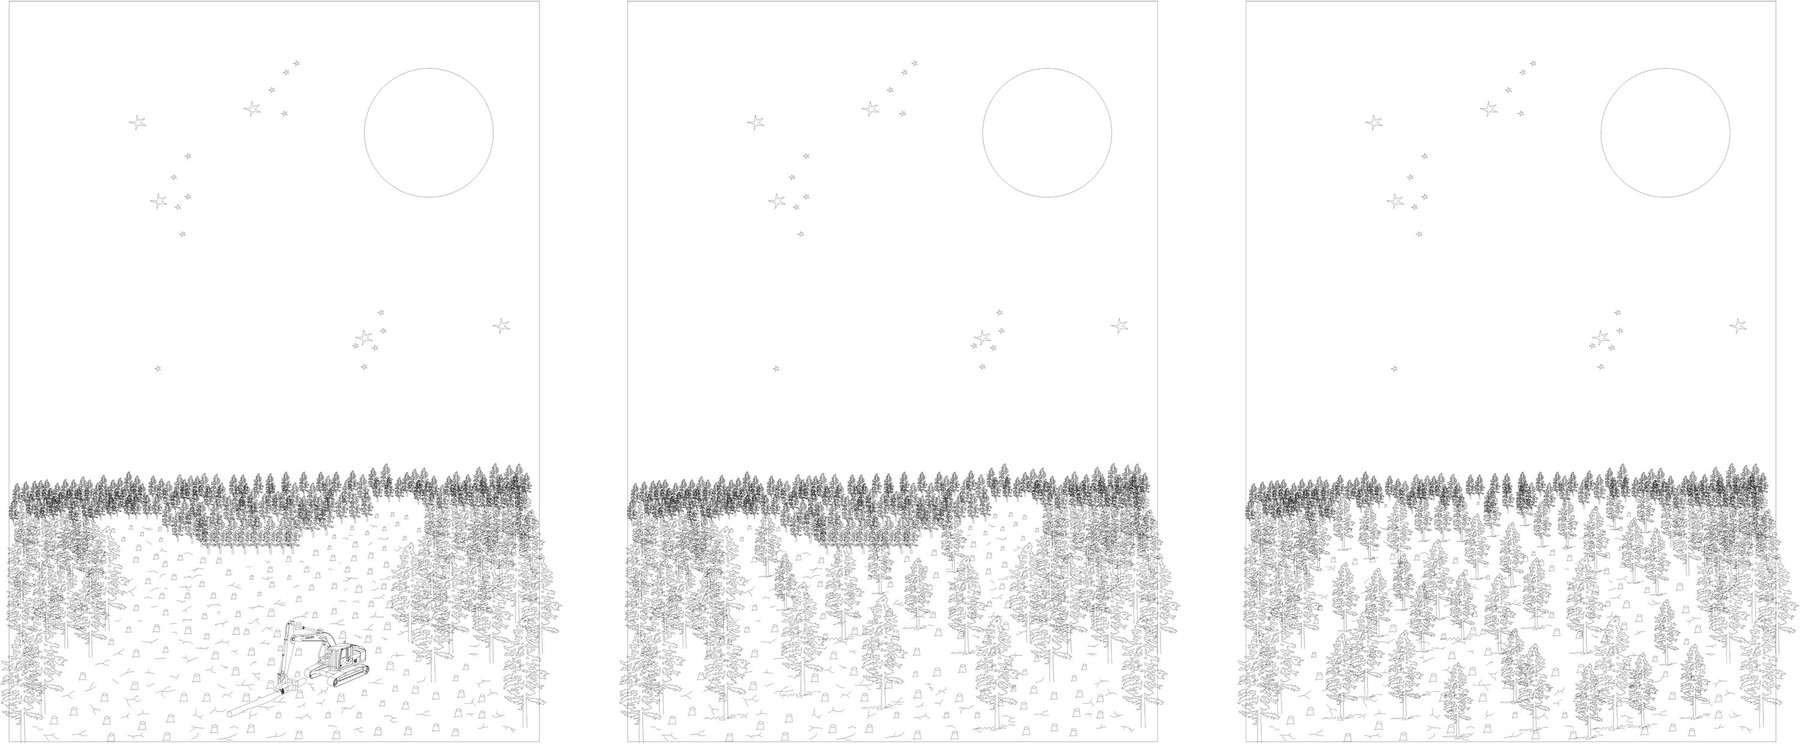 Morgan Davies, Harvesting Diagrams, The forms of timber harvesting have a serious impact on the landscape we see, here 3 examples highlight the movement from clear cut to seeding.jpg